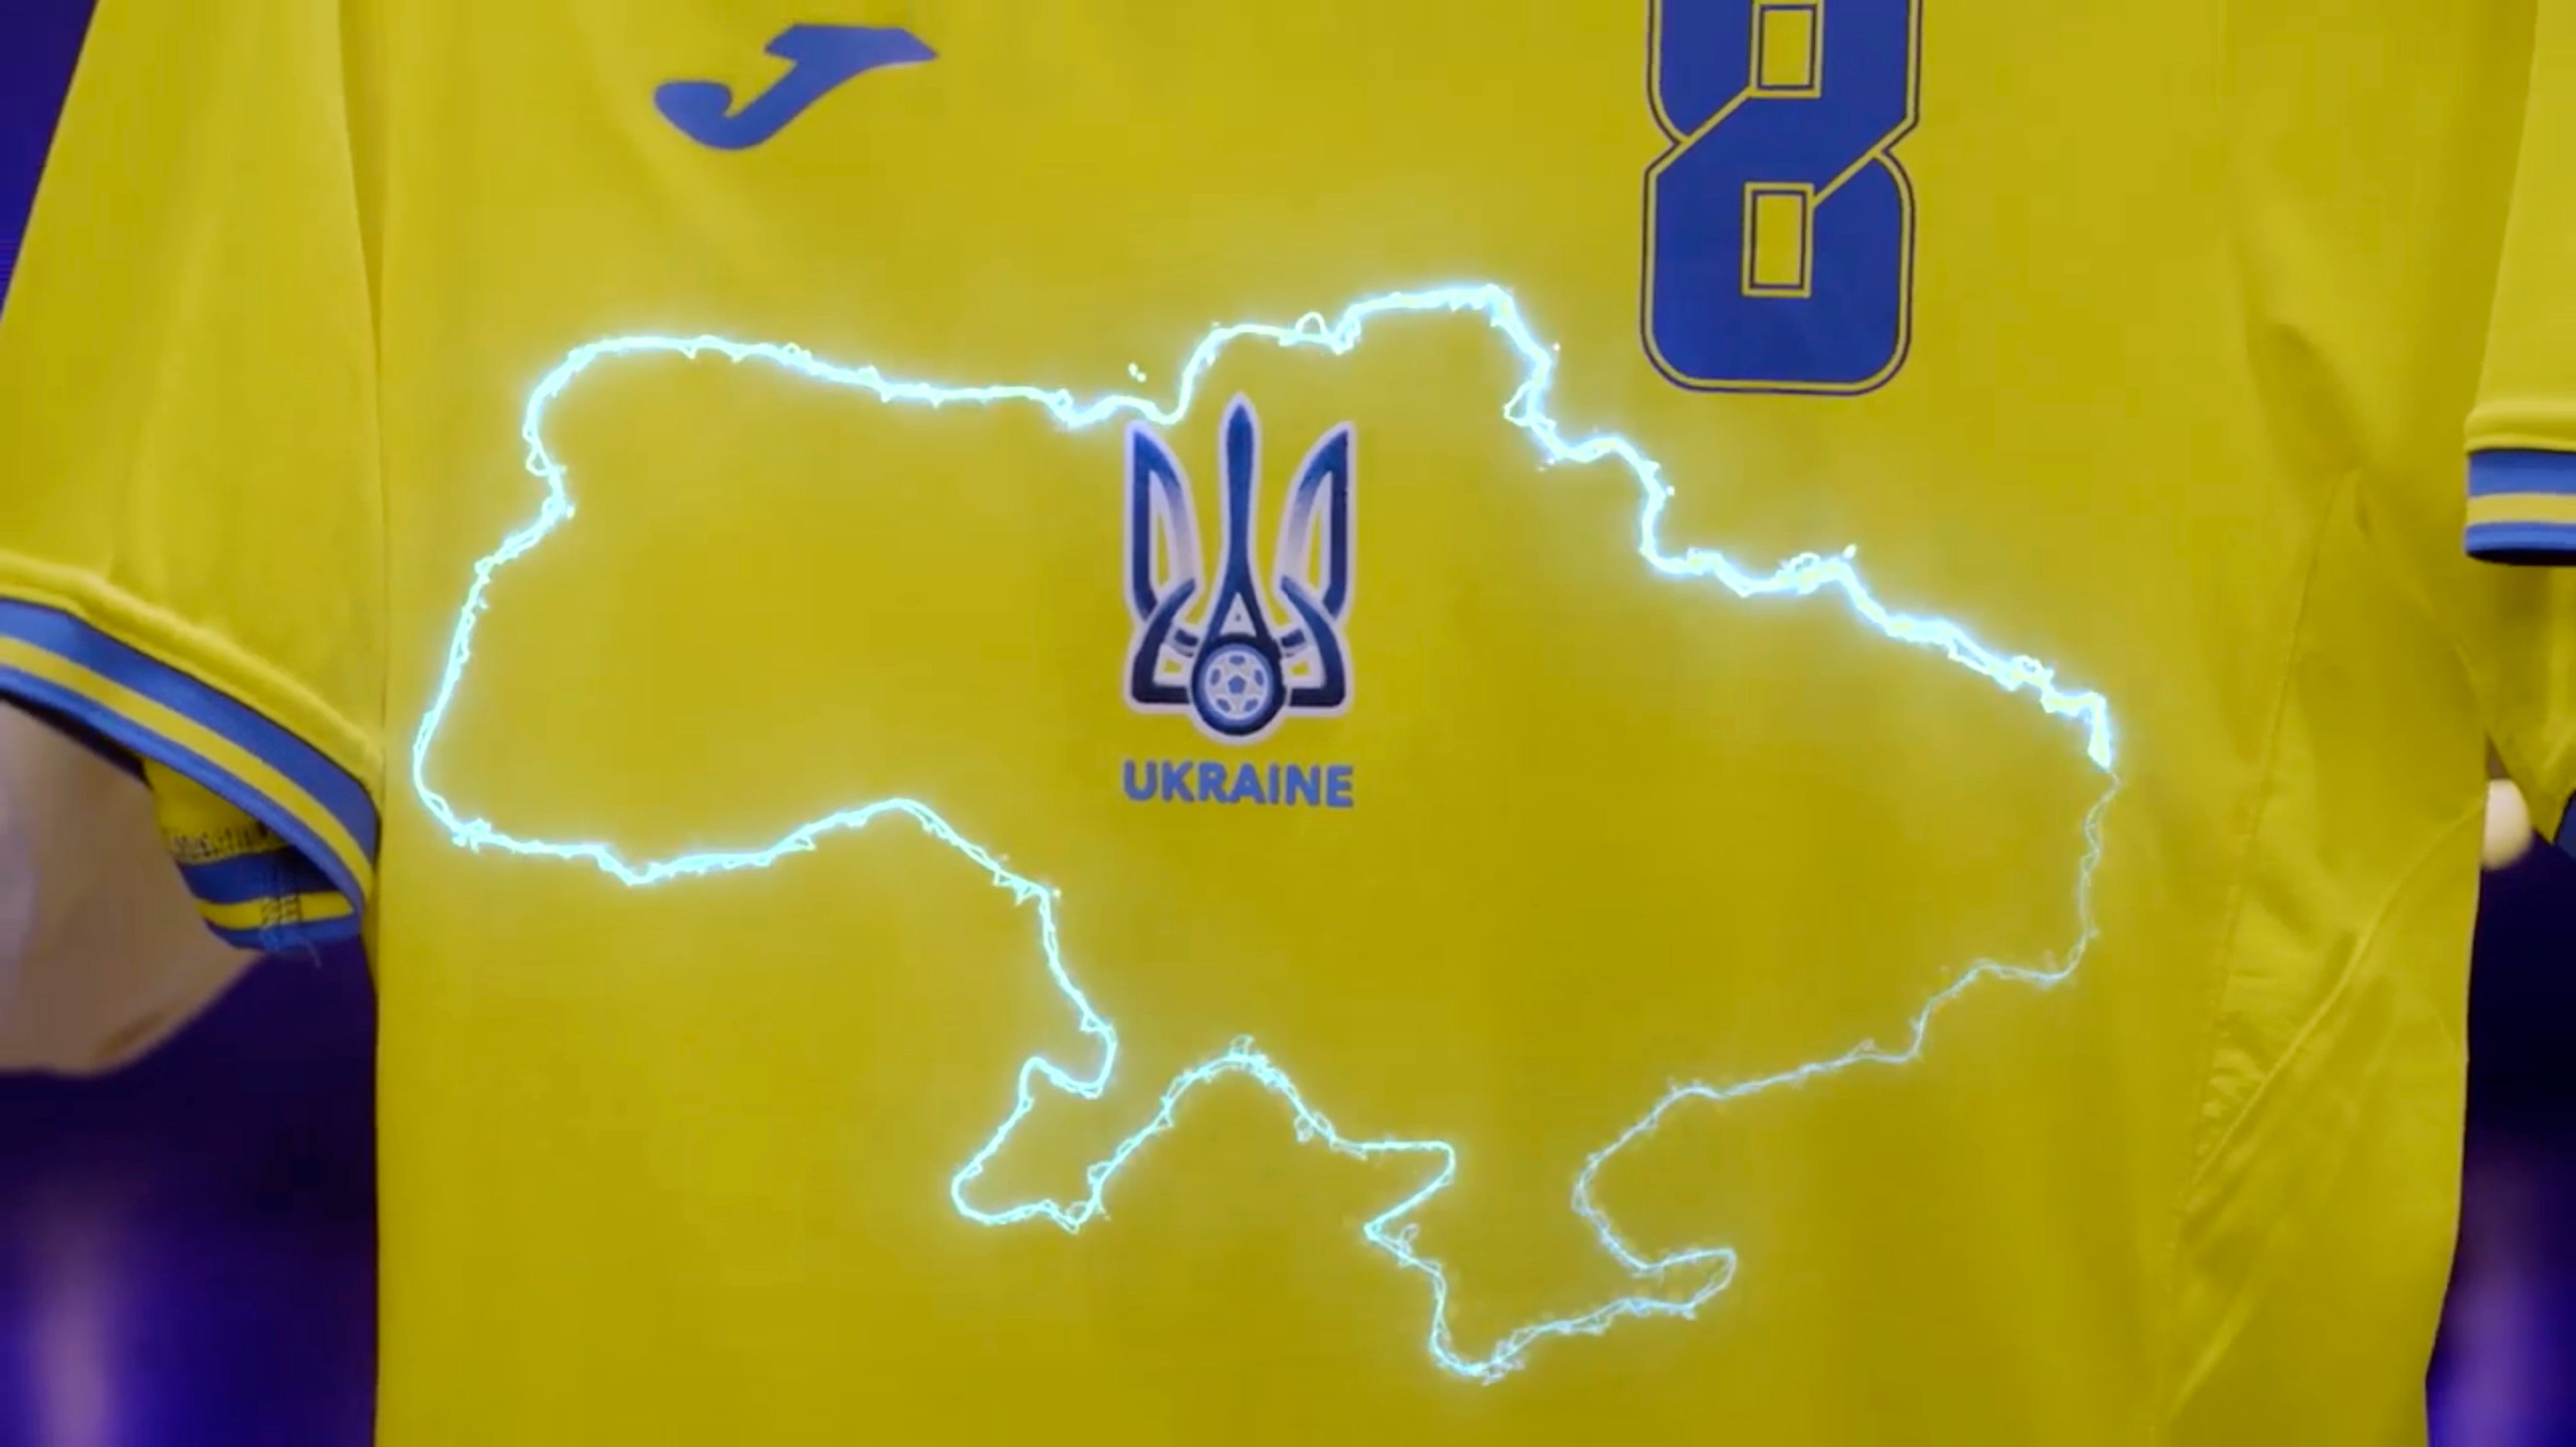 The new kit shows a map of Ukraine including Russian-annexed Crimea